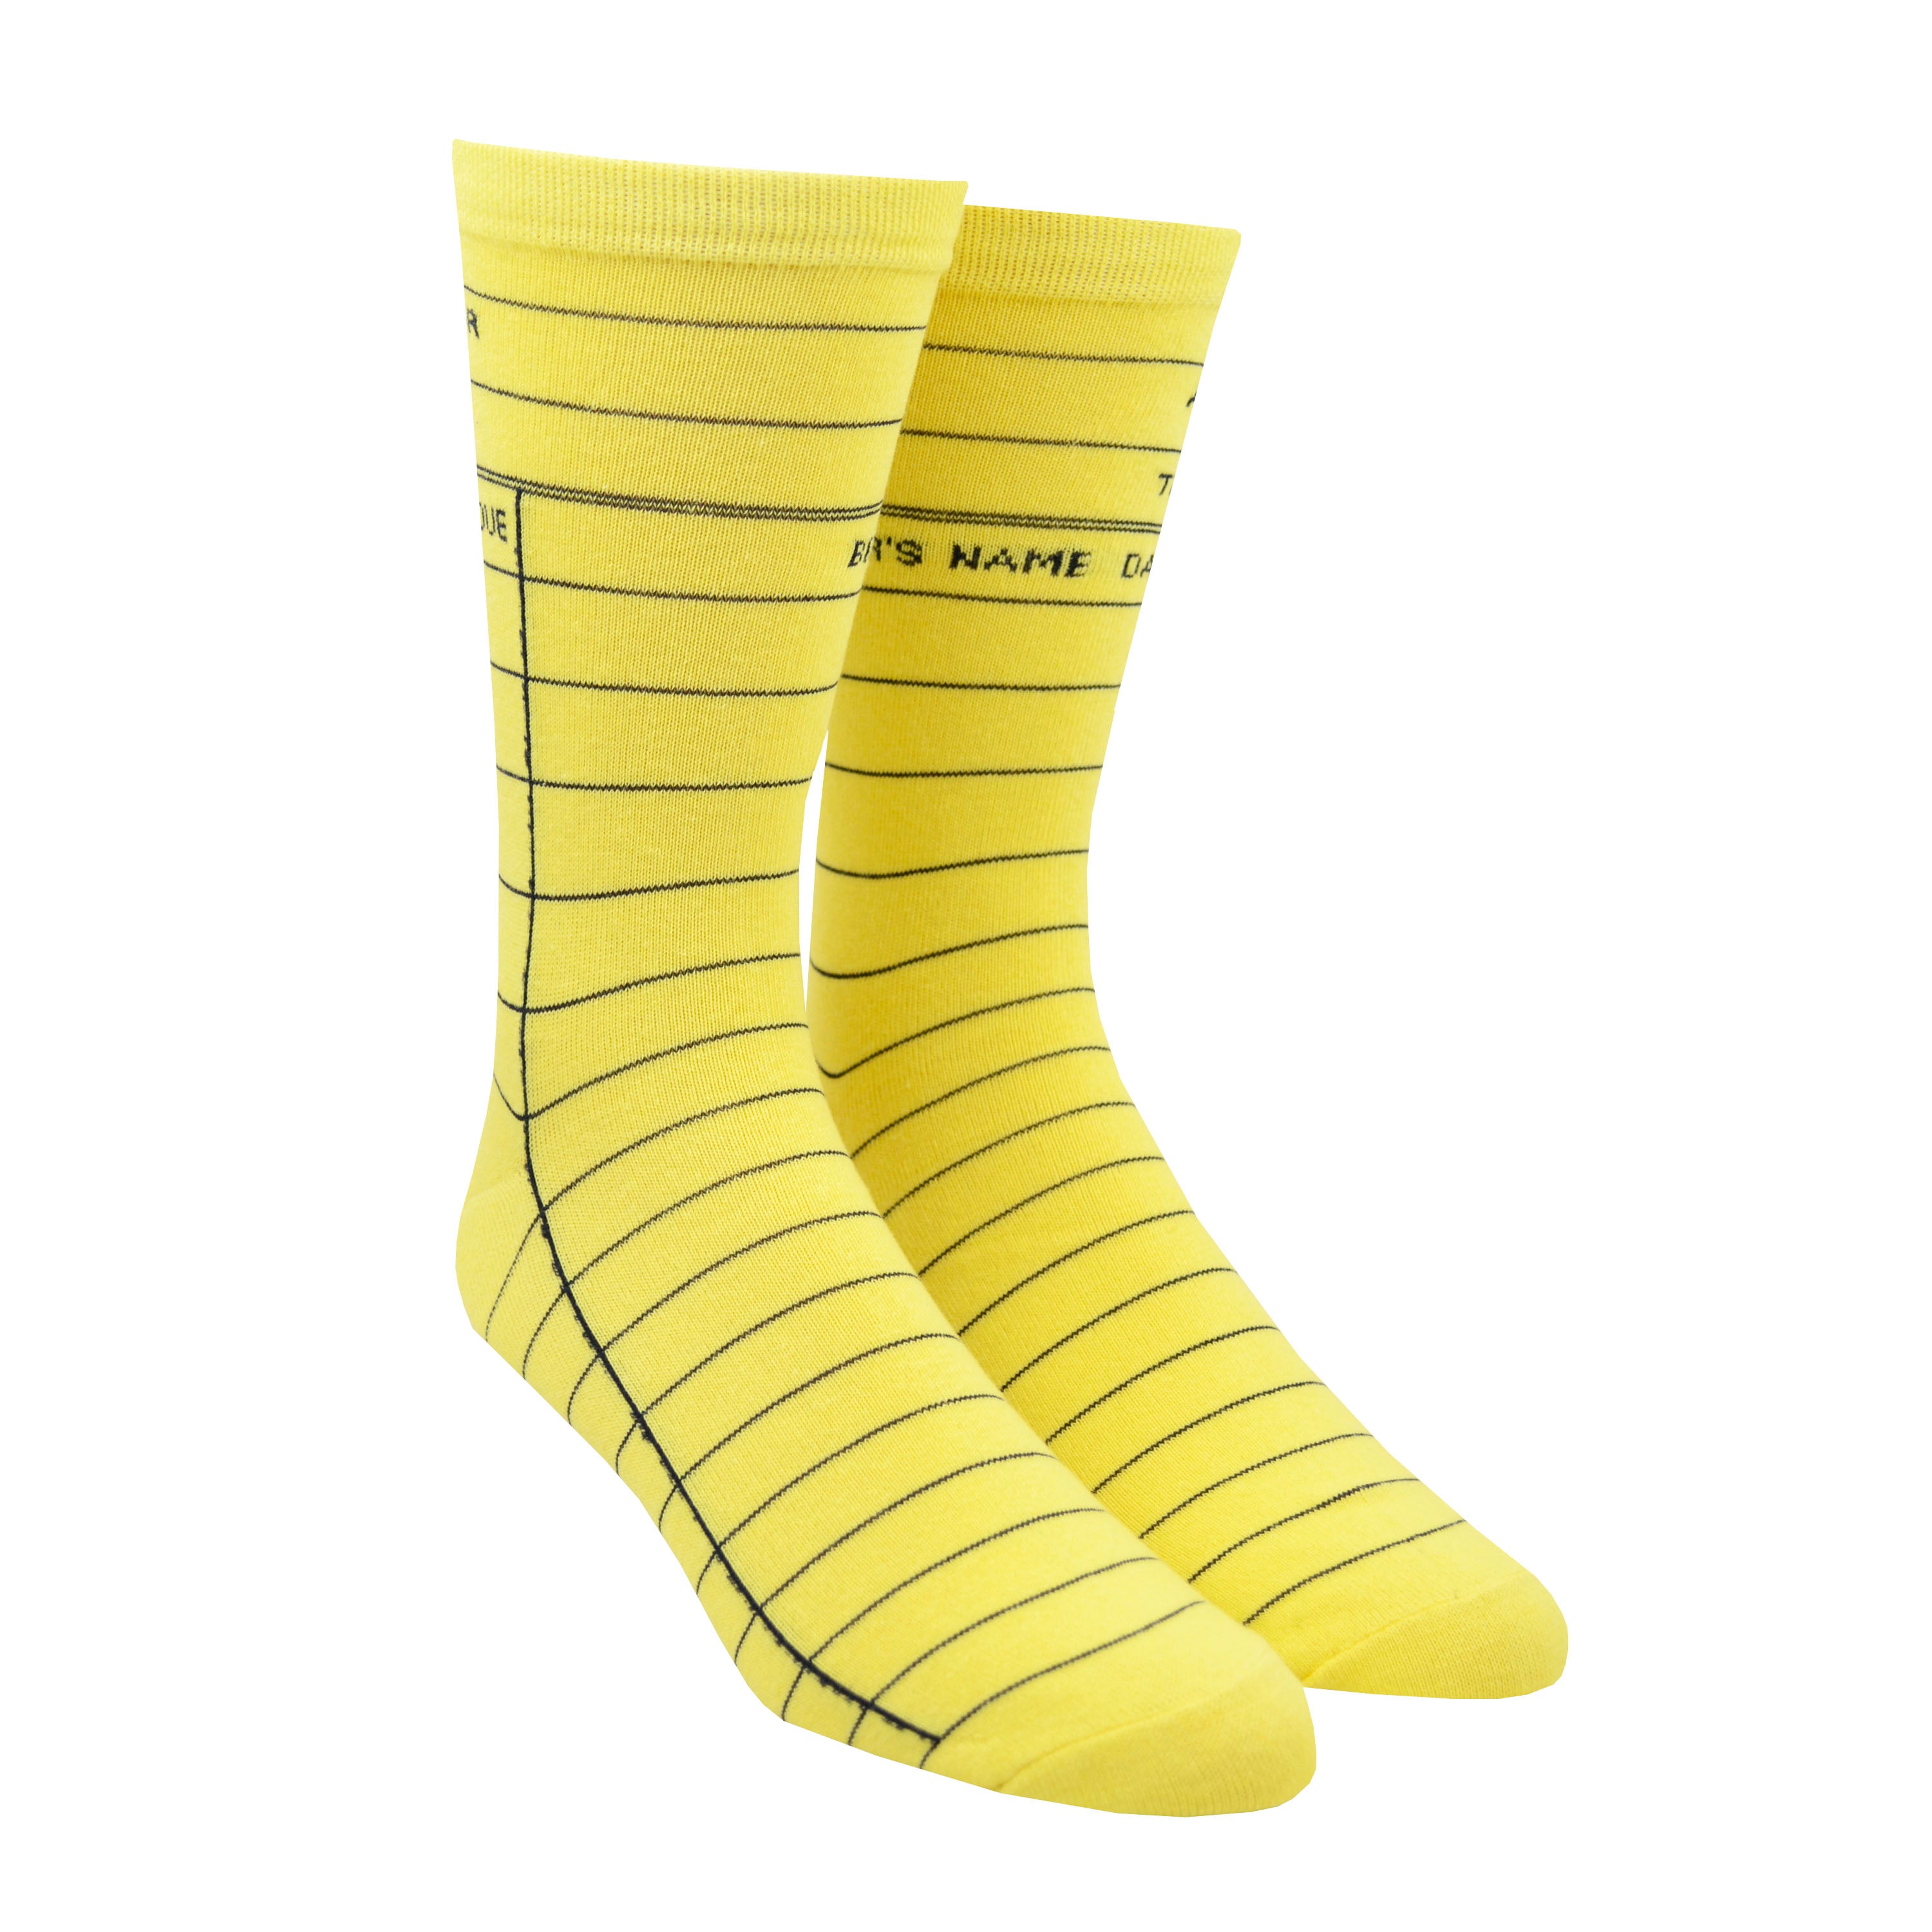 Shown on a leg form in the men's size, these yellow cotton unisex crew socks by the brand Out of Print feature the iconic library card design with the words 